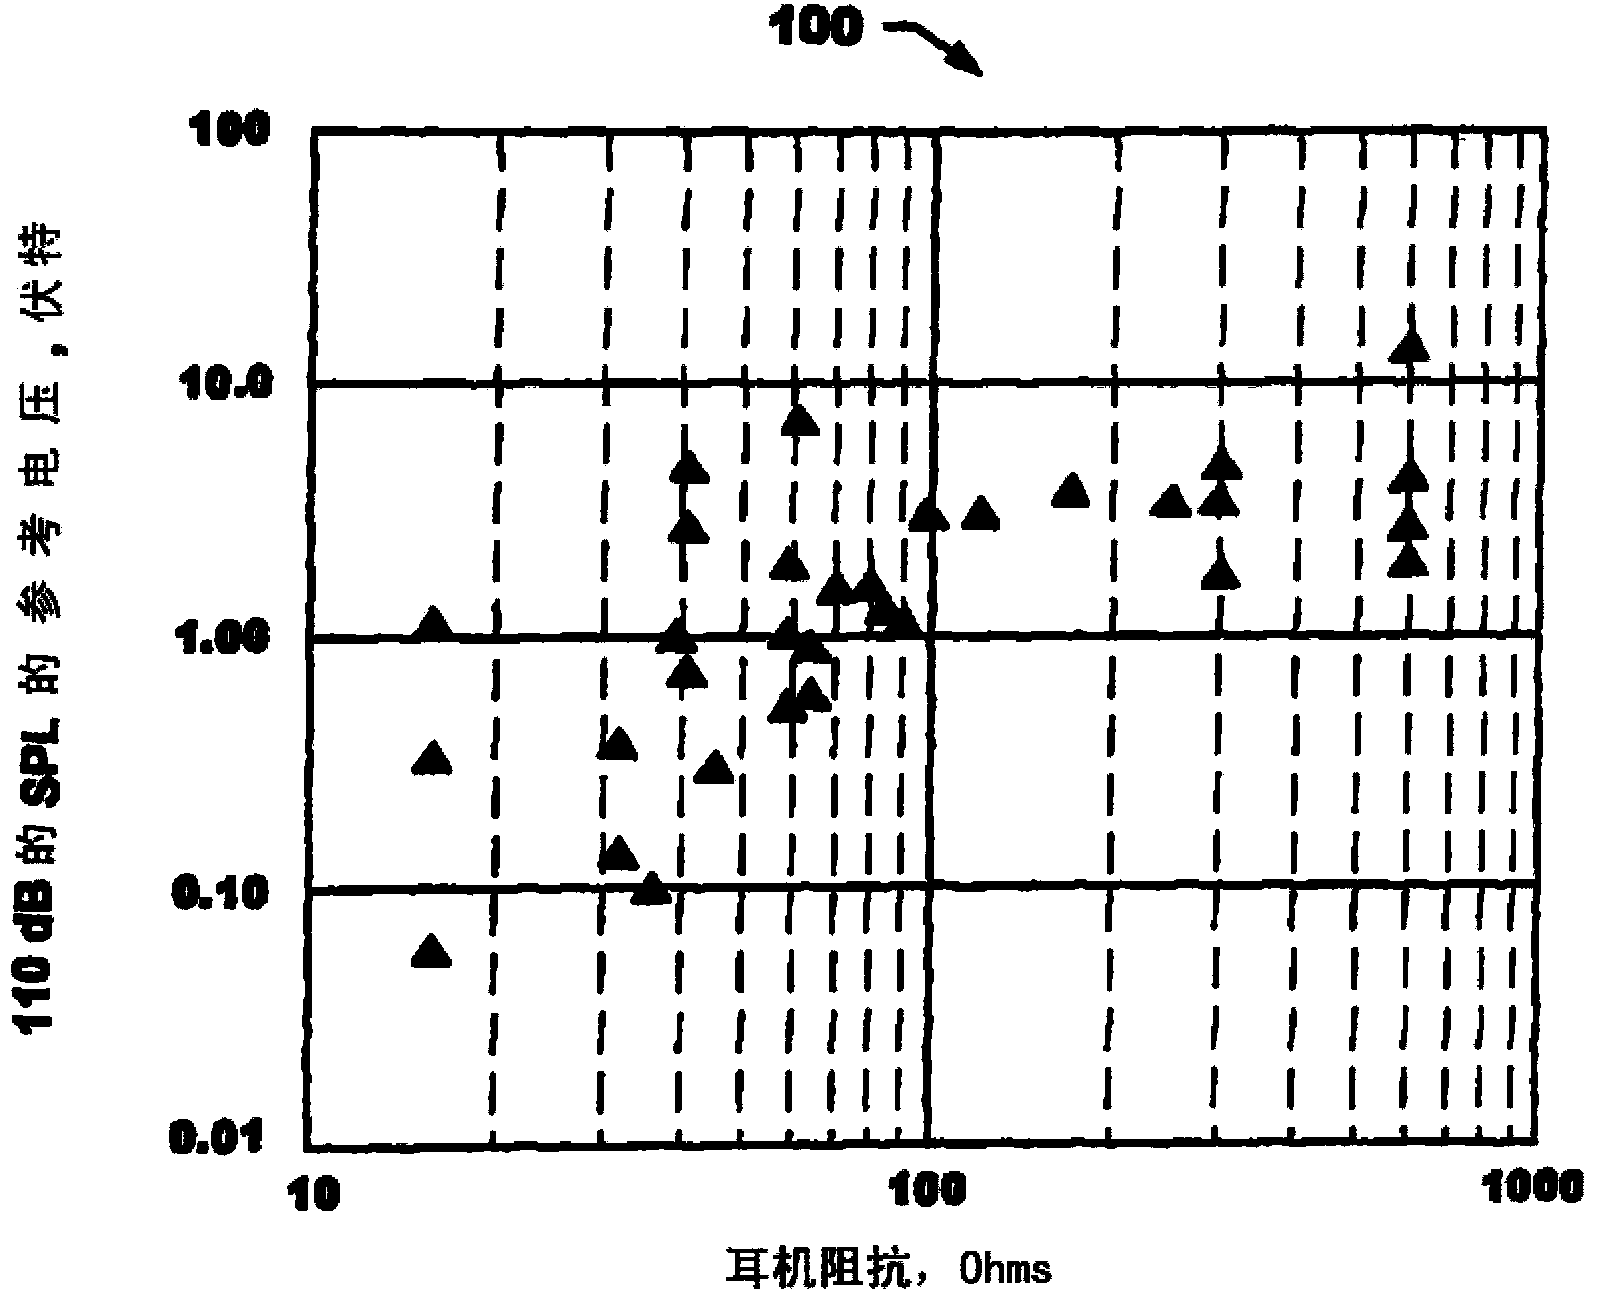 System and method for optimized playback of audio signals through headphones